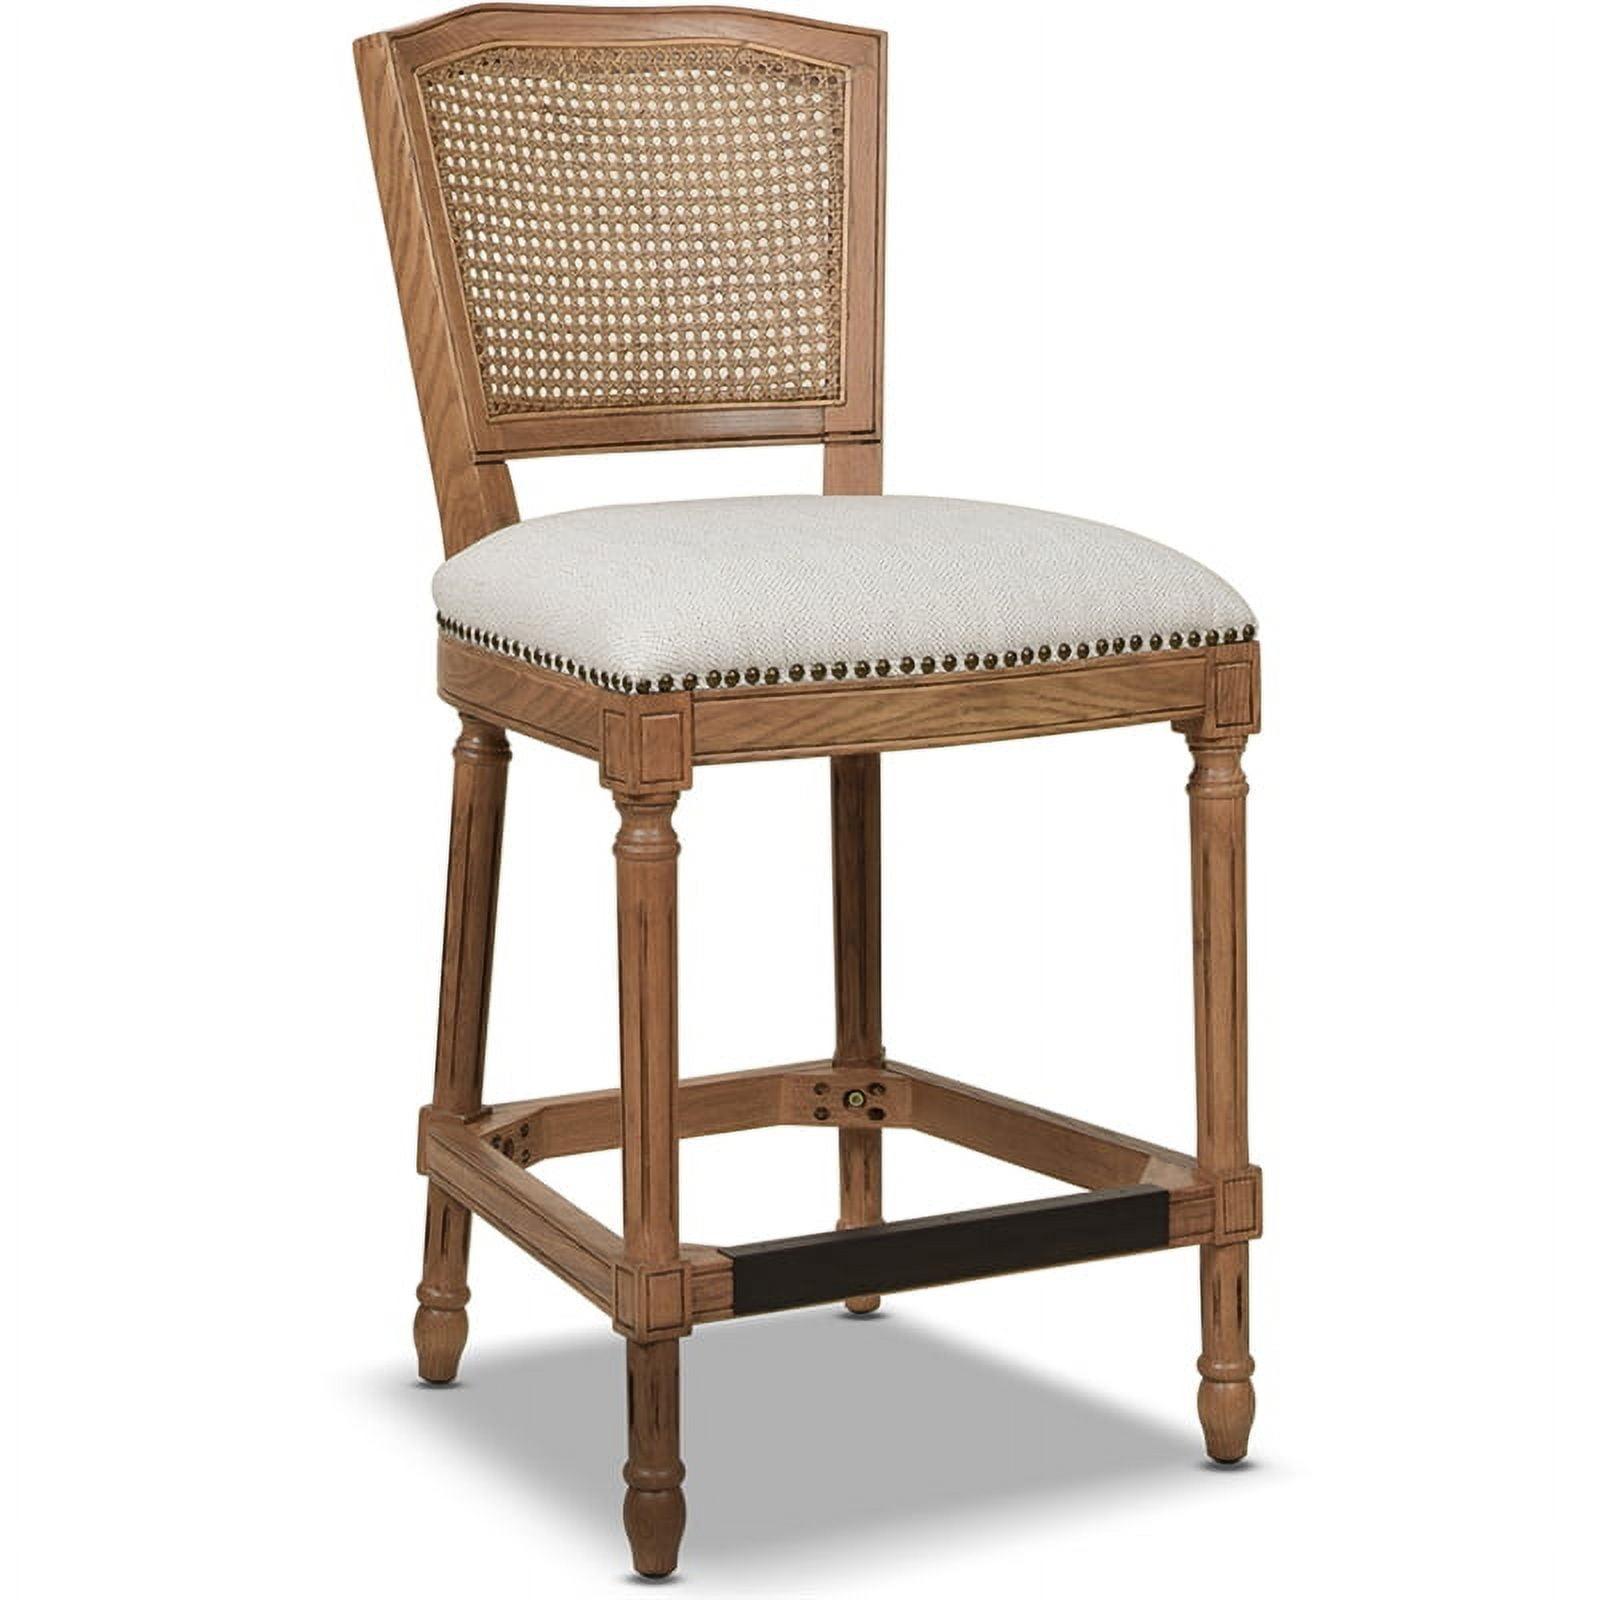 French Country Oak & Wicker Counter Bar Stool in White Pepper